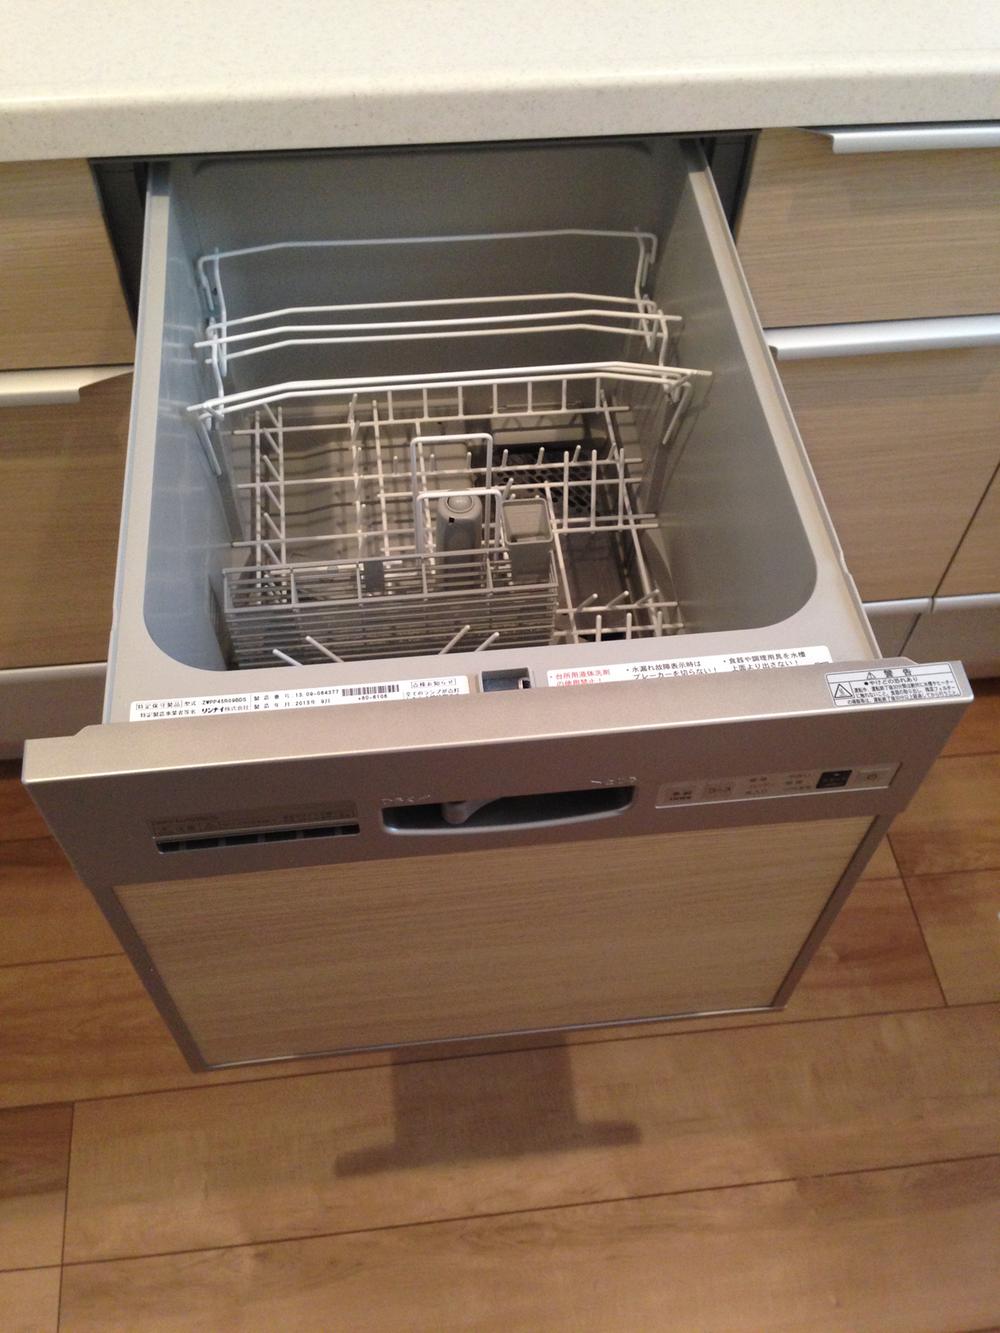 Other Equipment. Standard equipped with a dishwasher to all building